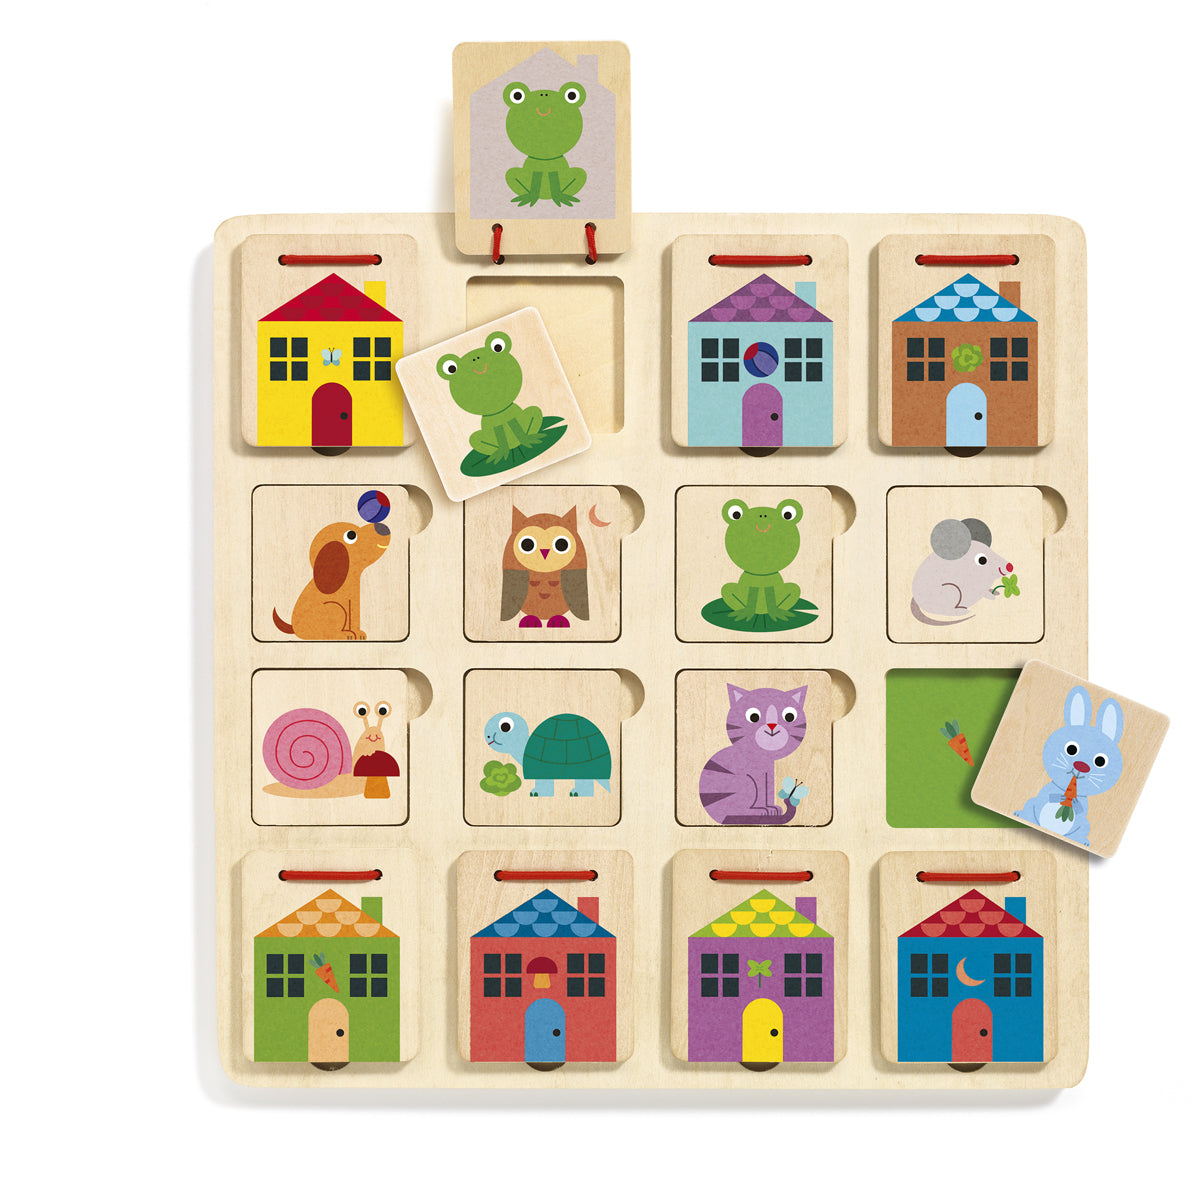 Cabanimo hide and seek wooden puzzle from Djeco